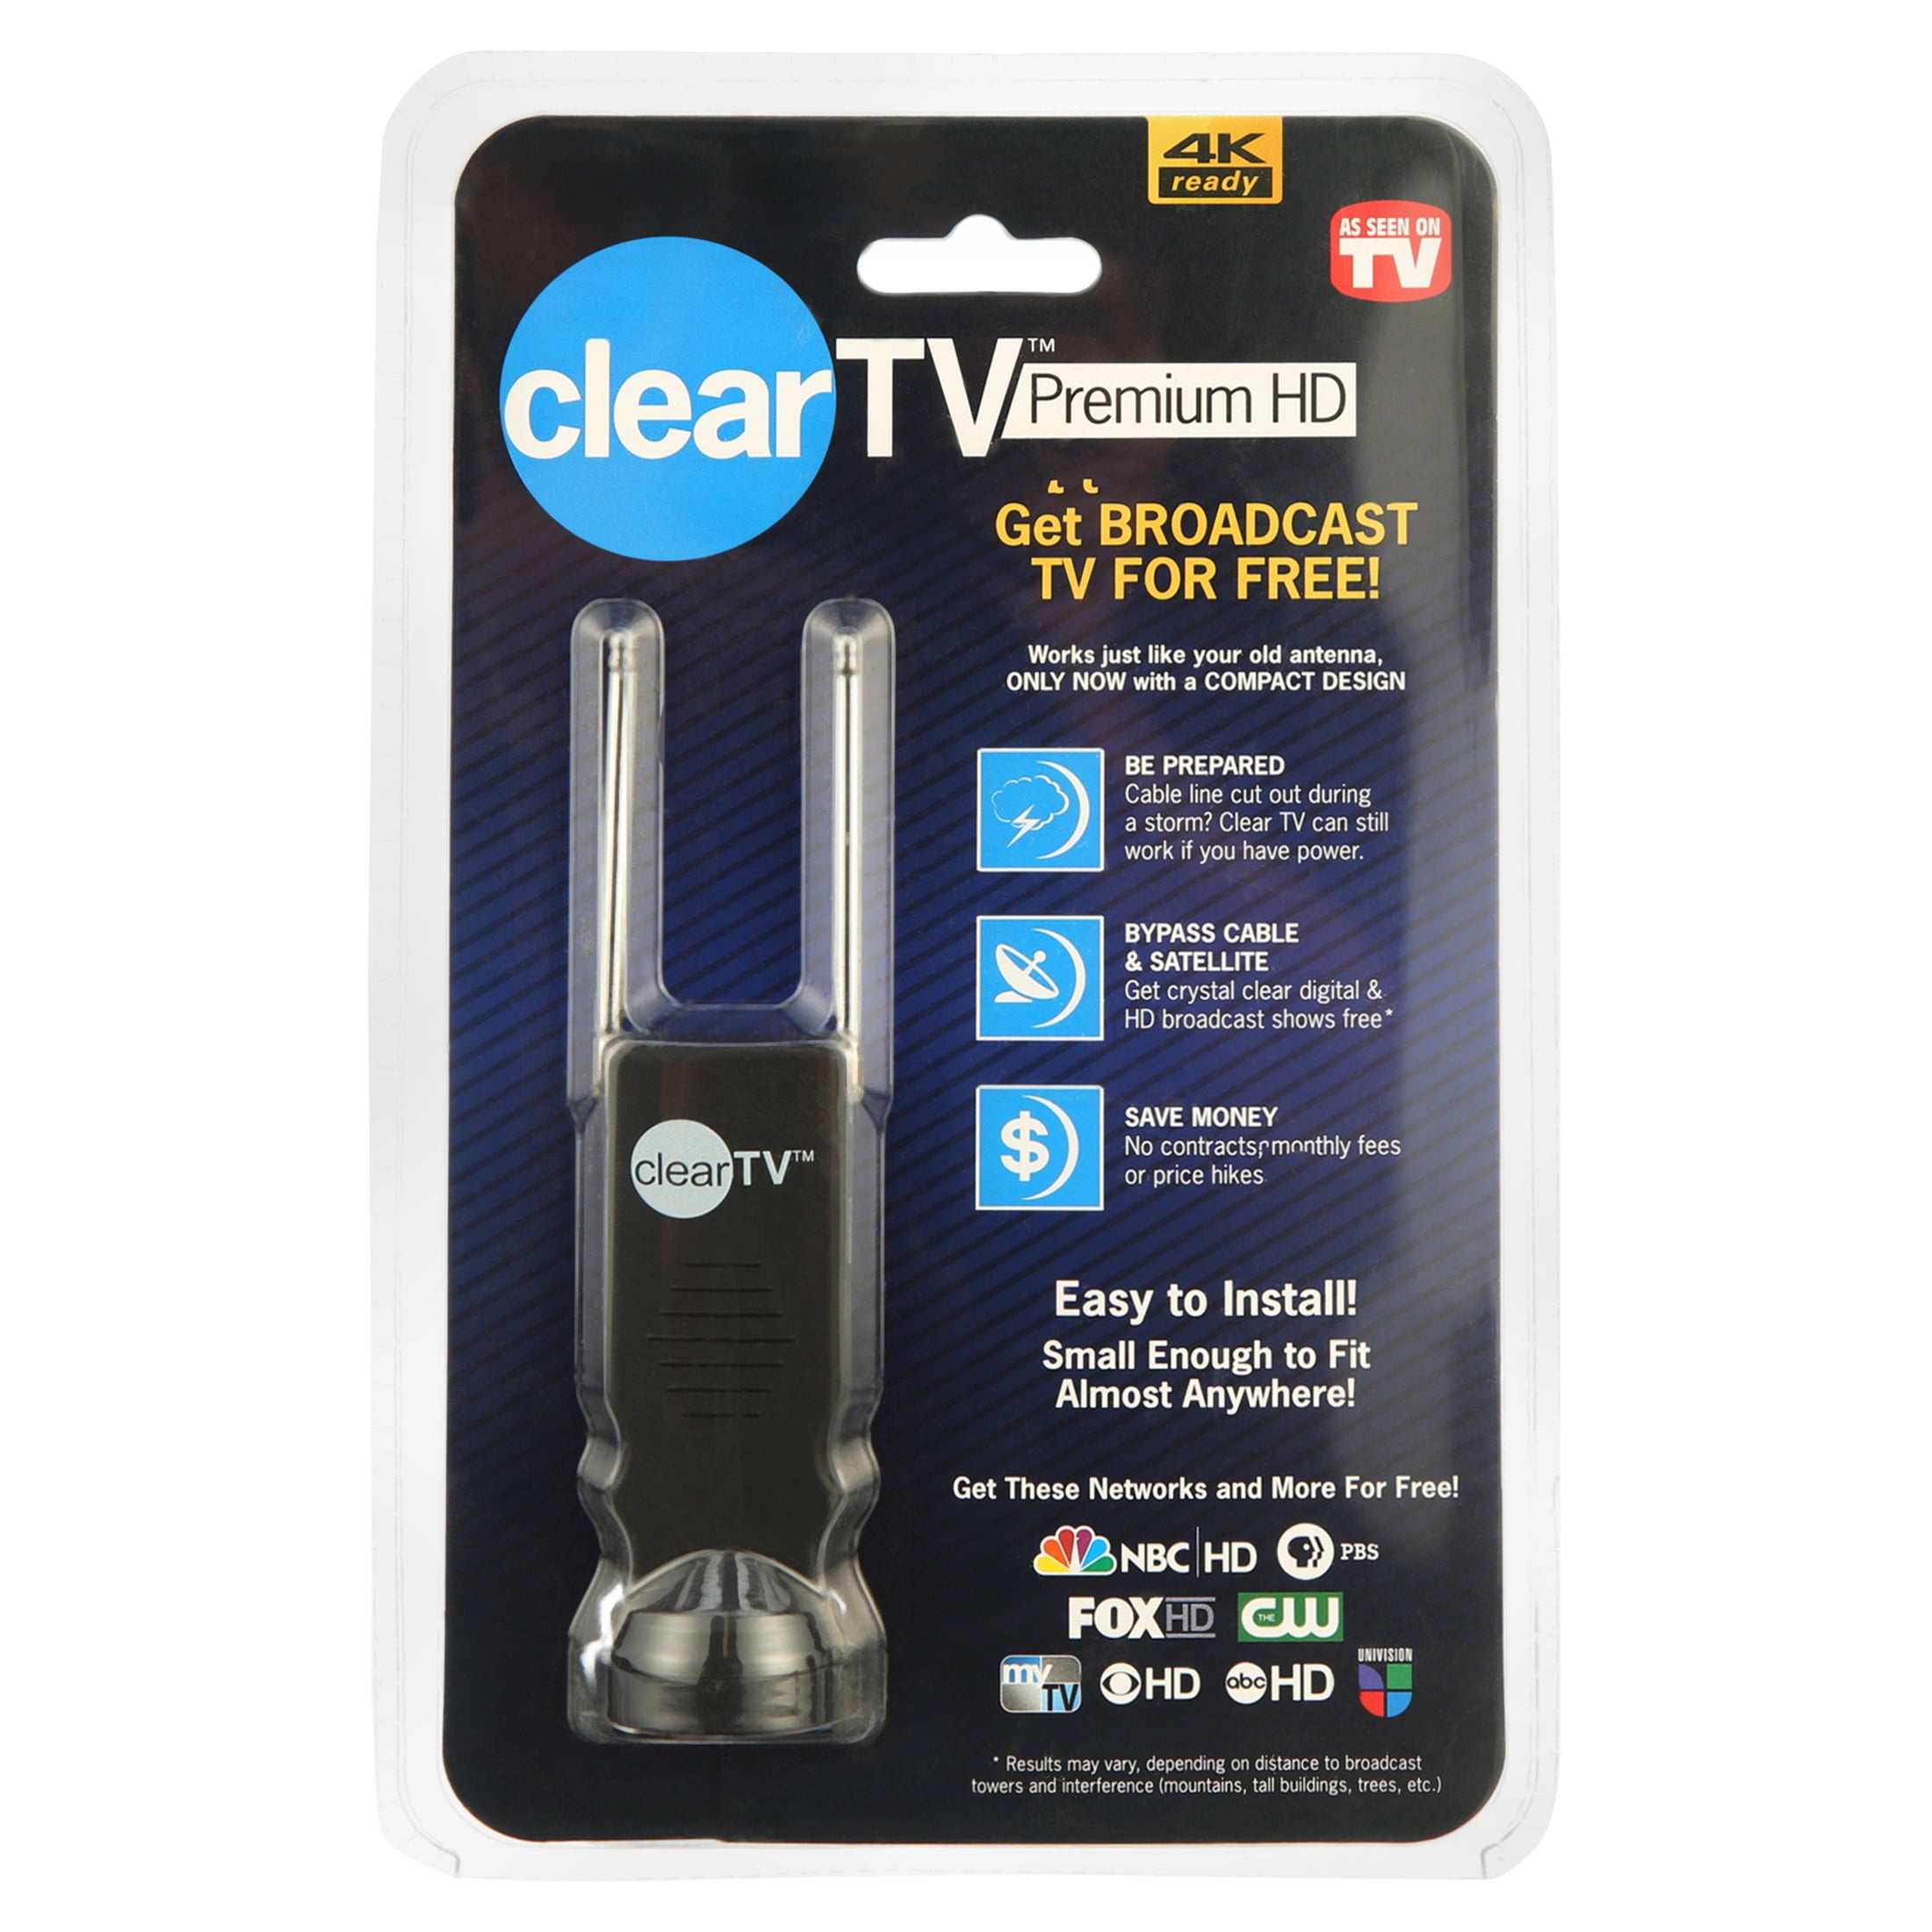 clear tv premium hd as seen on tv